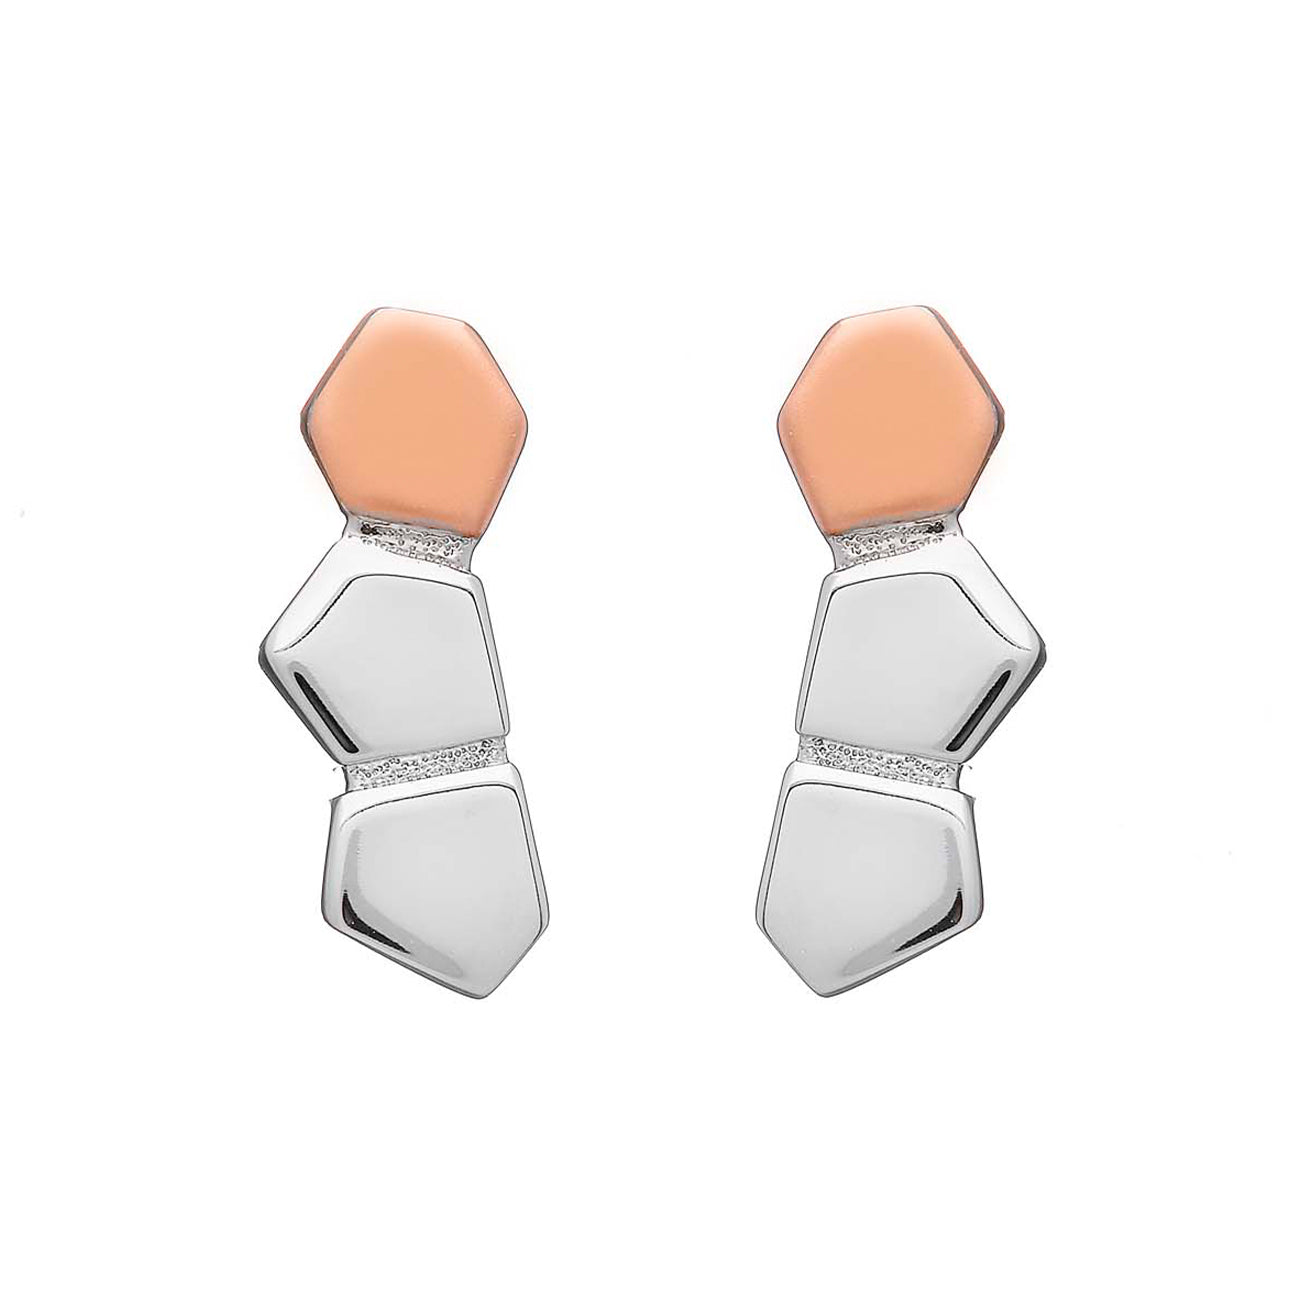 Sterling Silver and Rose Gold Giant's Causeway Stud Earrings